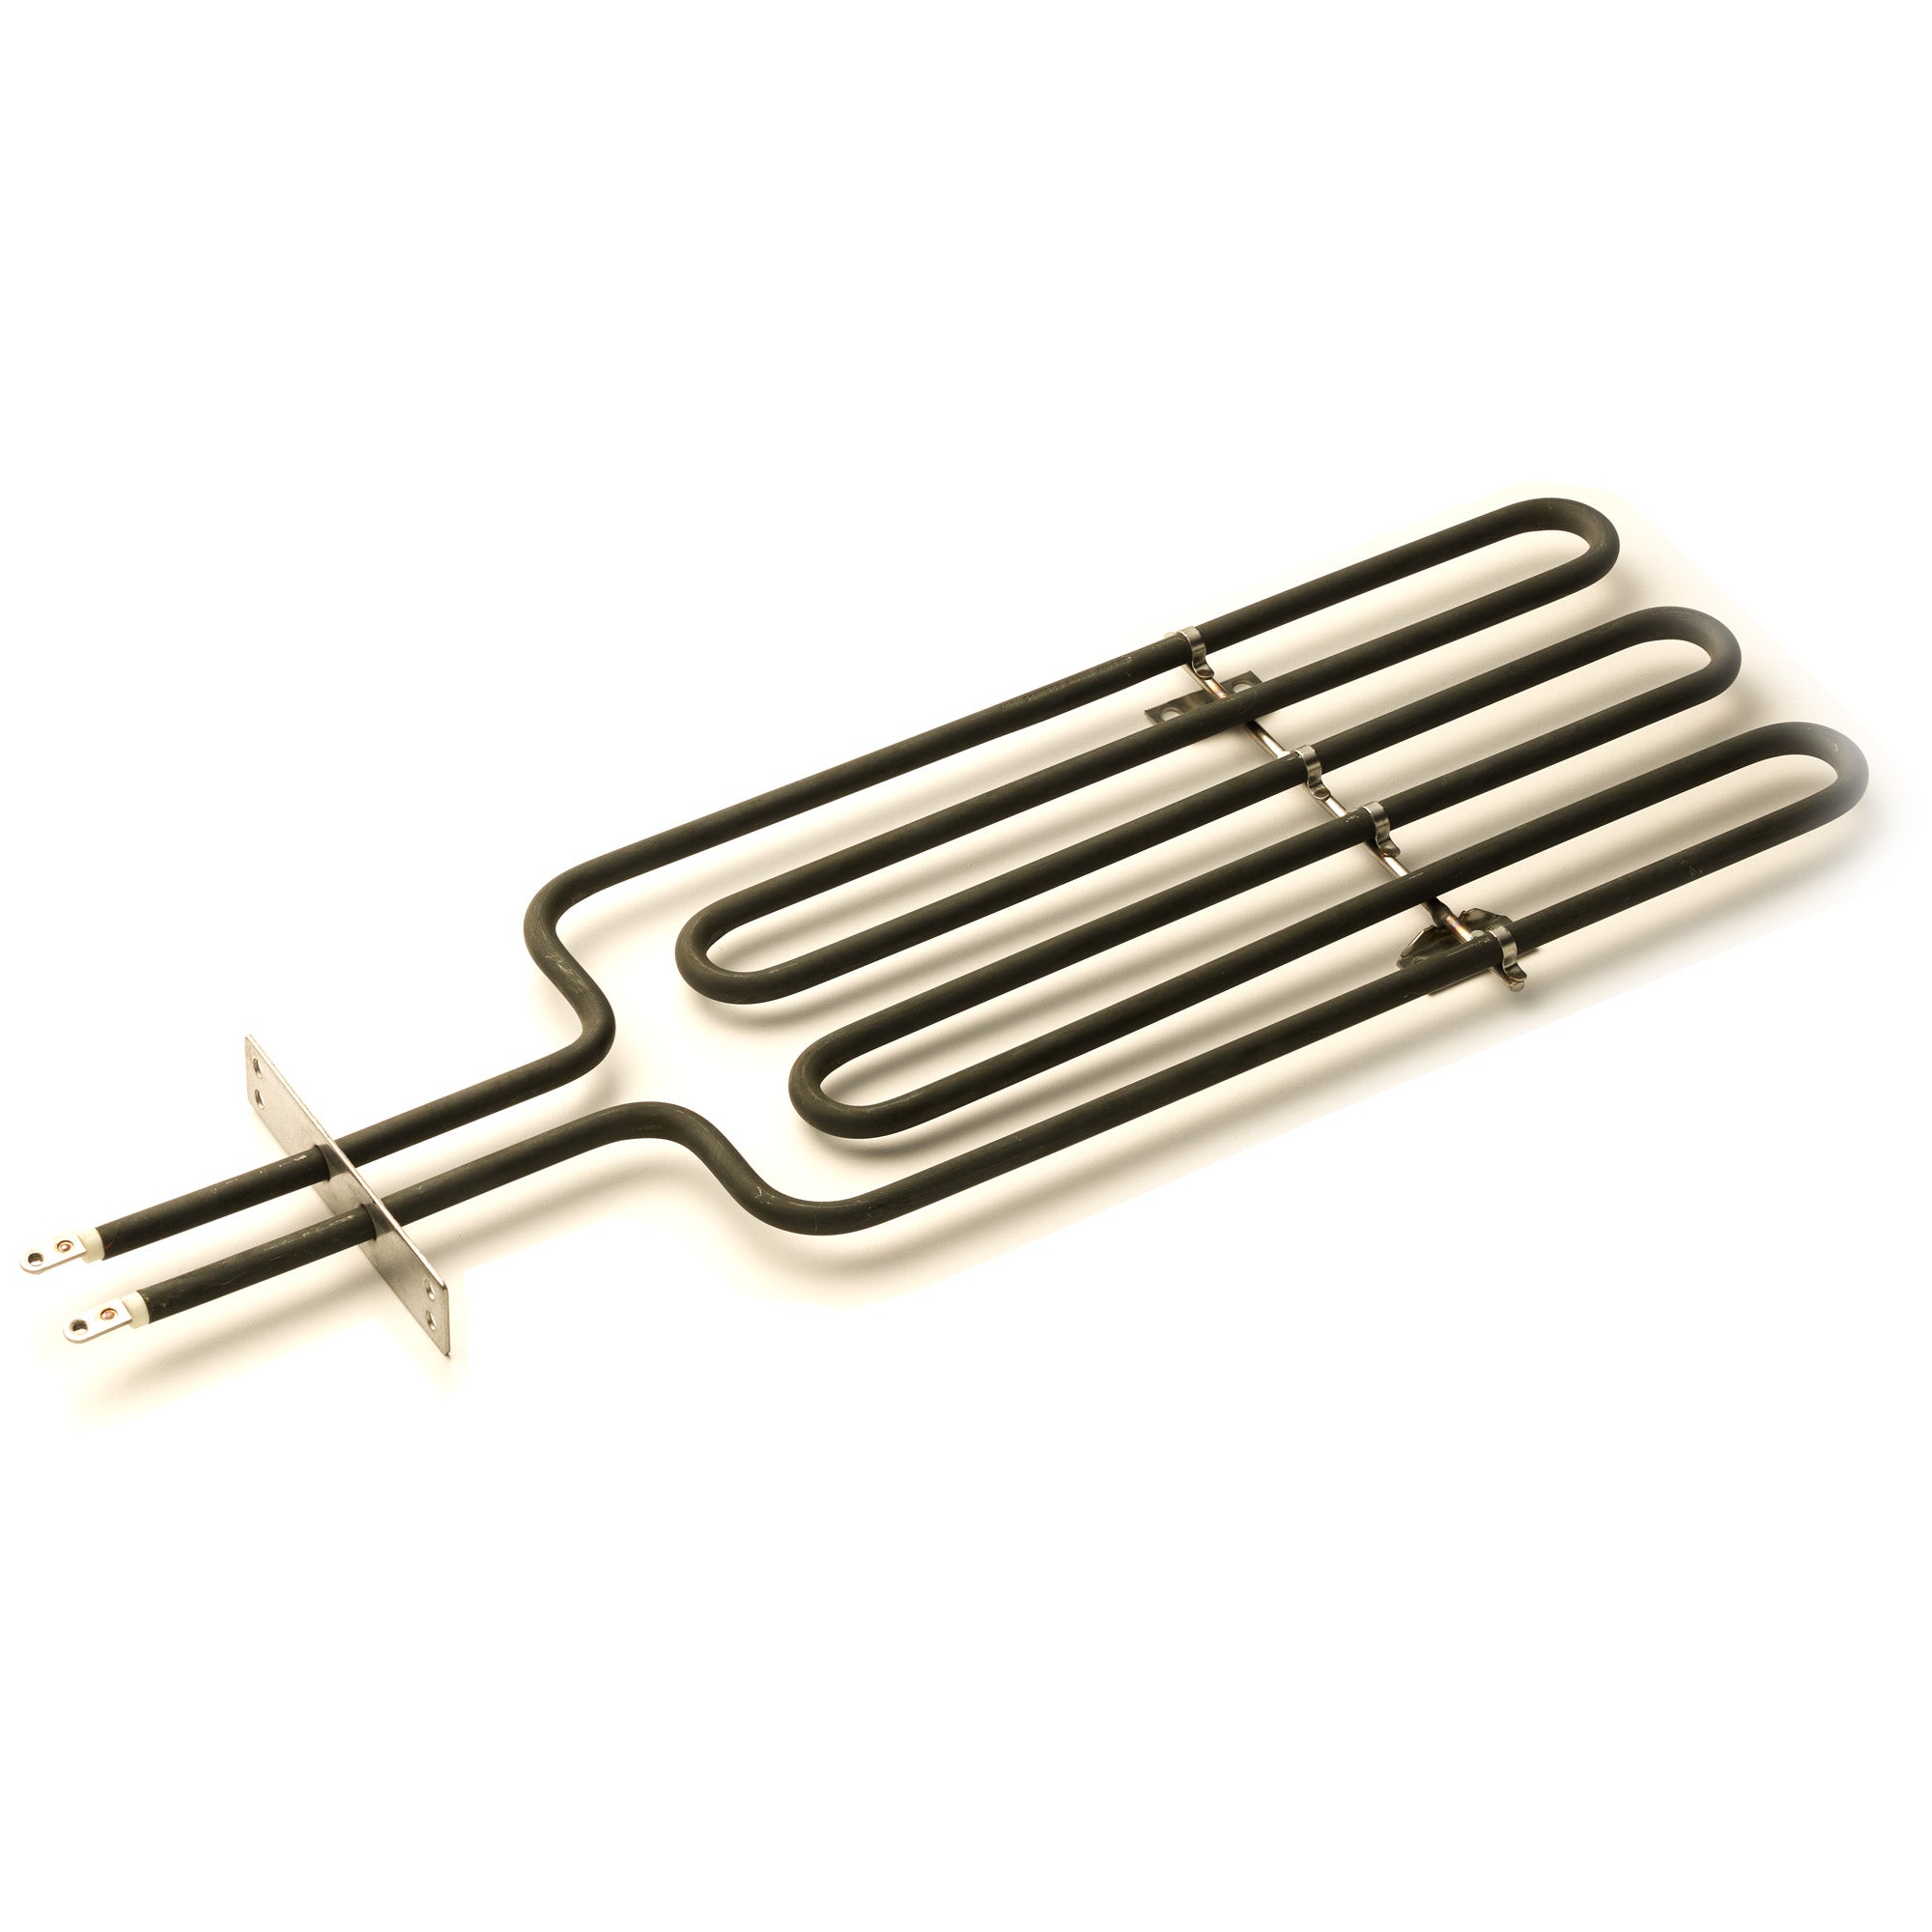 Heating Element Bake 2500 Watts HRD4803U/LP Small Oven Part Number 10100124